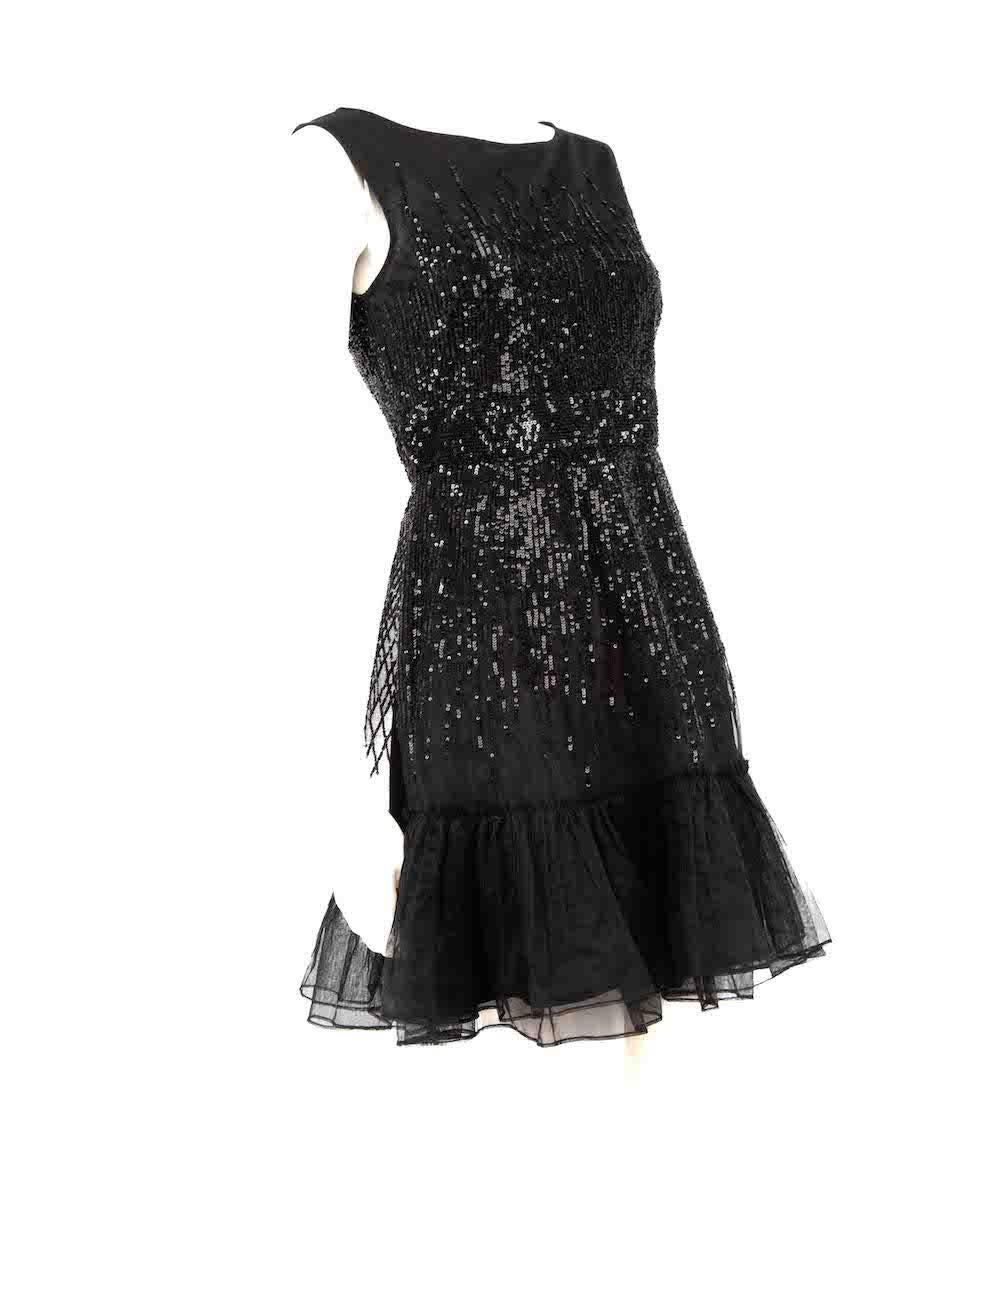 CONDITION is Very good. Minimal wear to dress is evident. Minimal wear to the front is seen with a few pulls to the weave on this used Red Valentino designer resale item.
 
 
 
 Details
 
 
 Black
 
 Synthetic
 
 Dress
 
 Mini
 
 Sequin embellished
